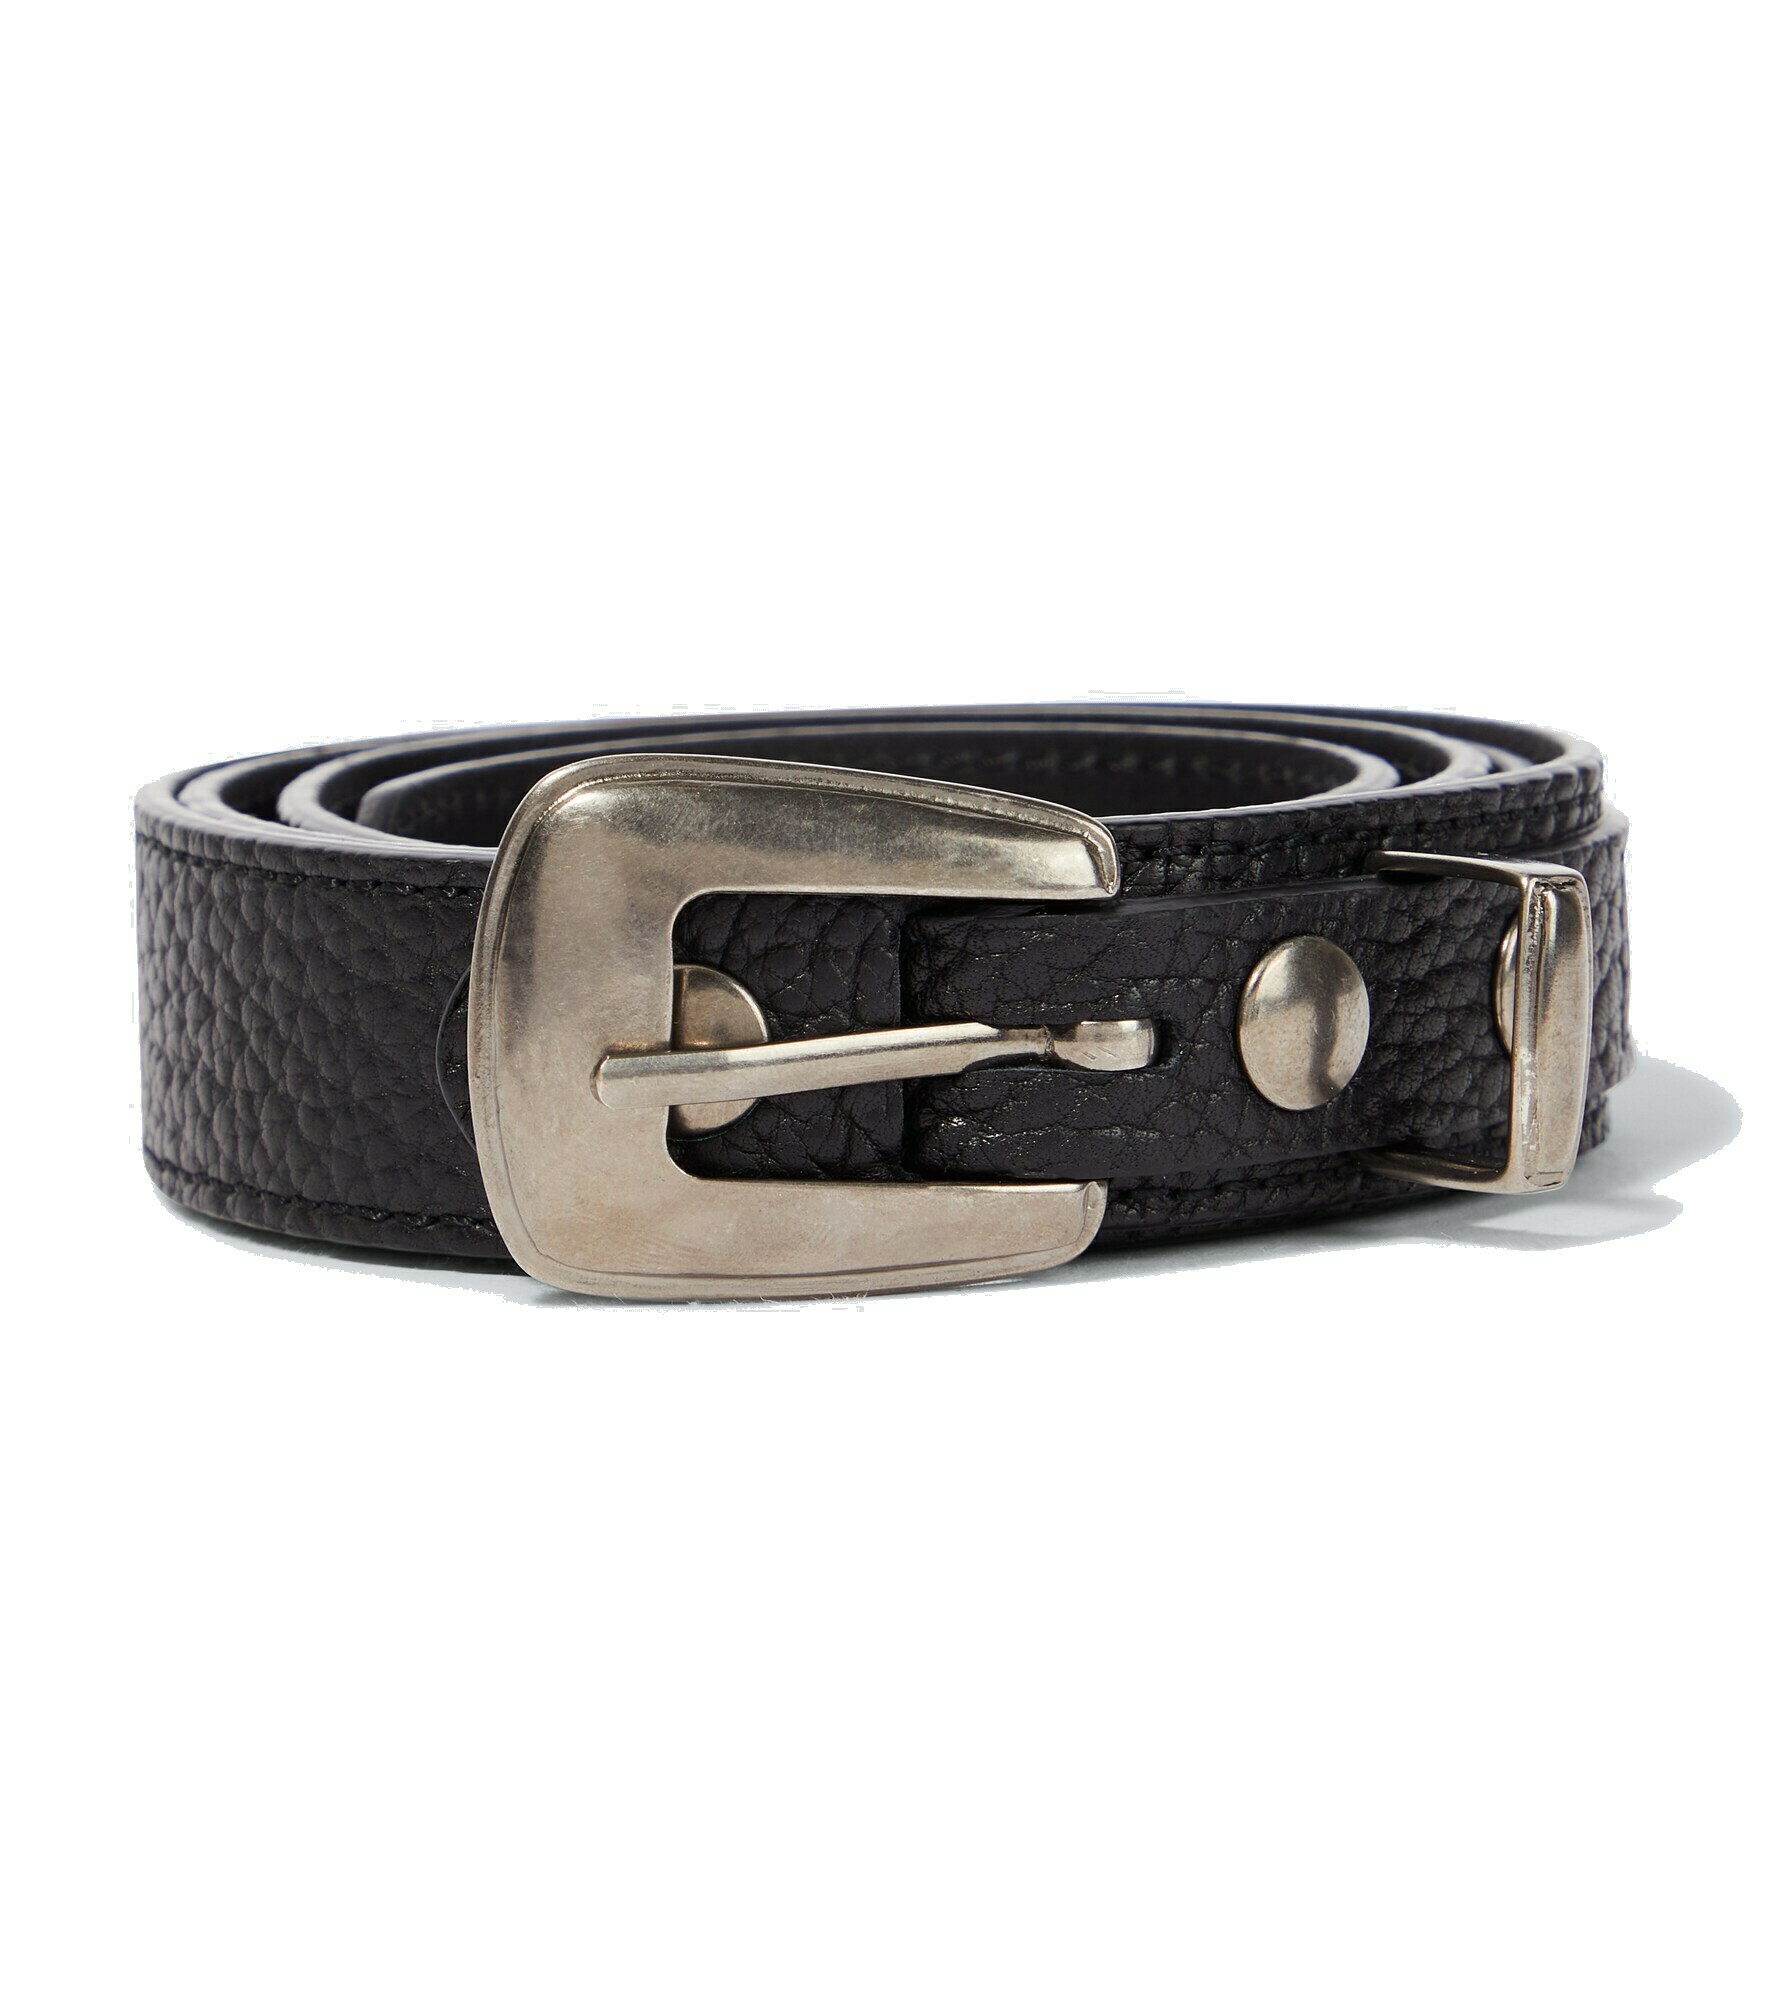 Lemaire - Grained leather belt Lemaire